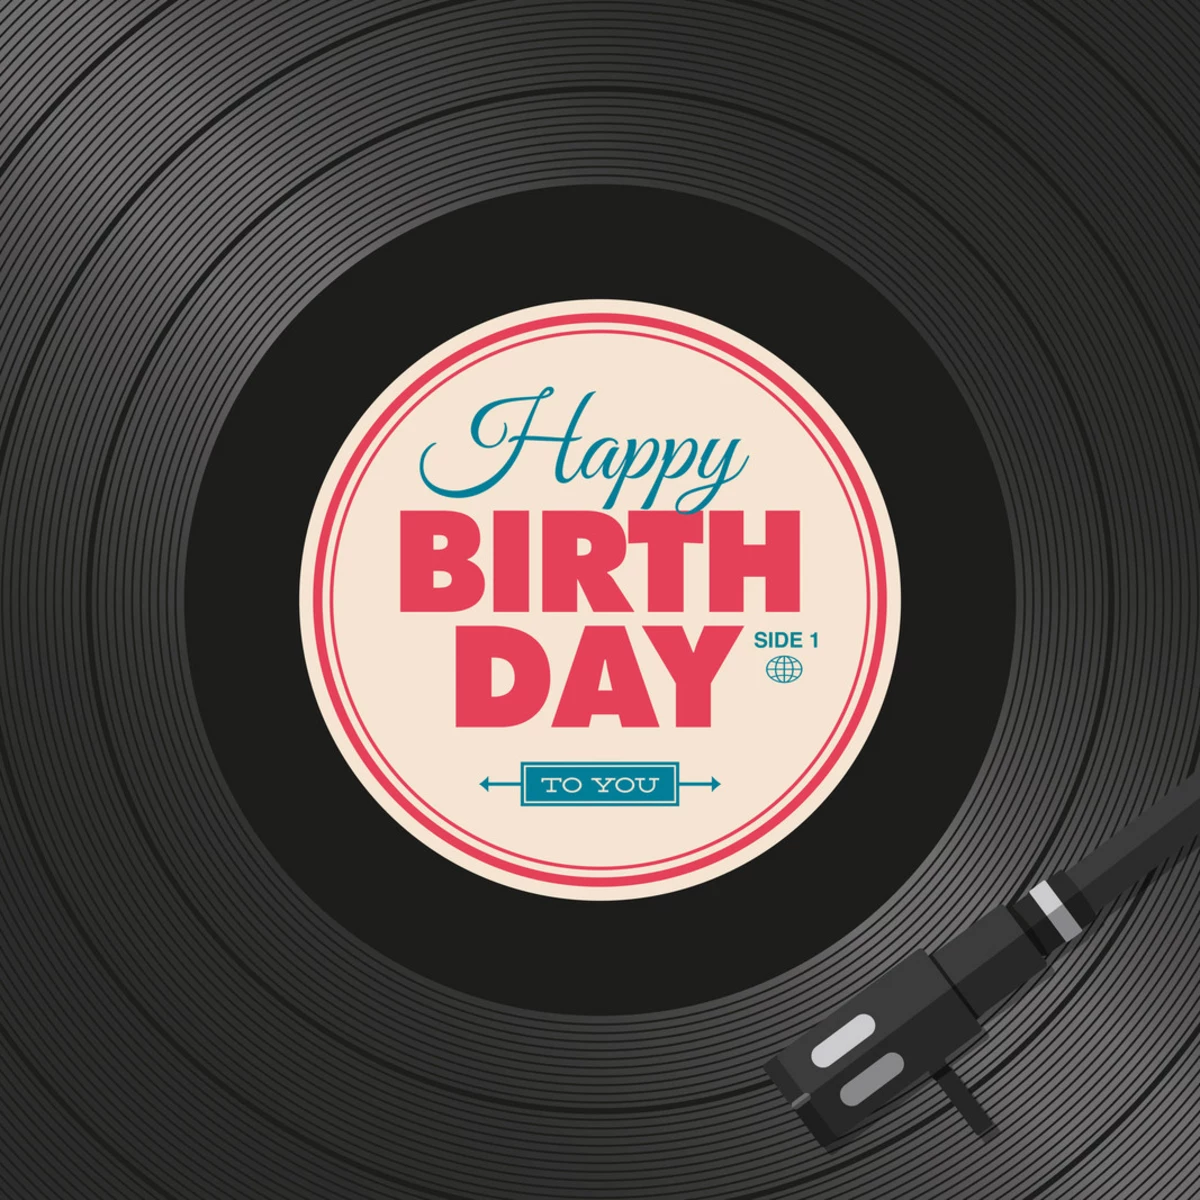 Do You Remember The Number 1 Song On Each Of Your Birthdays?